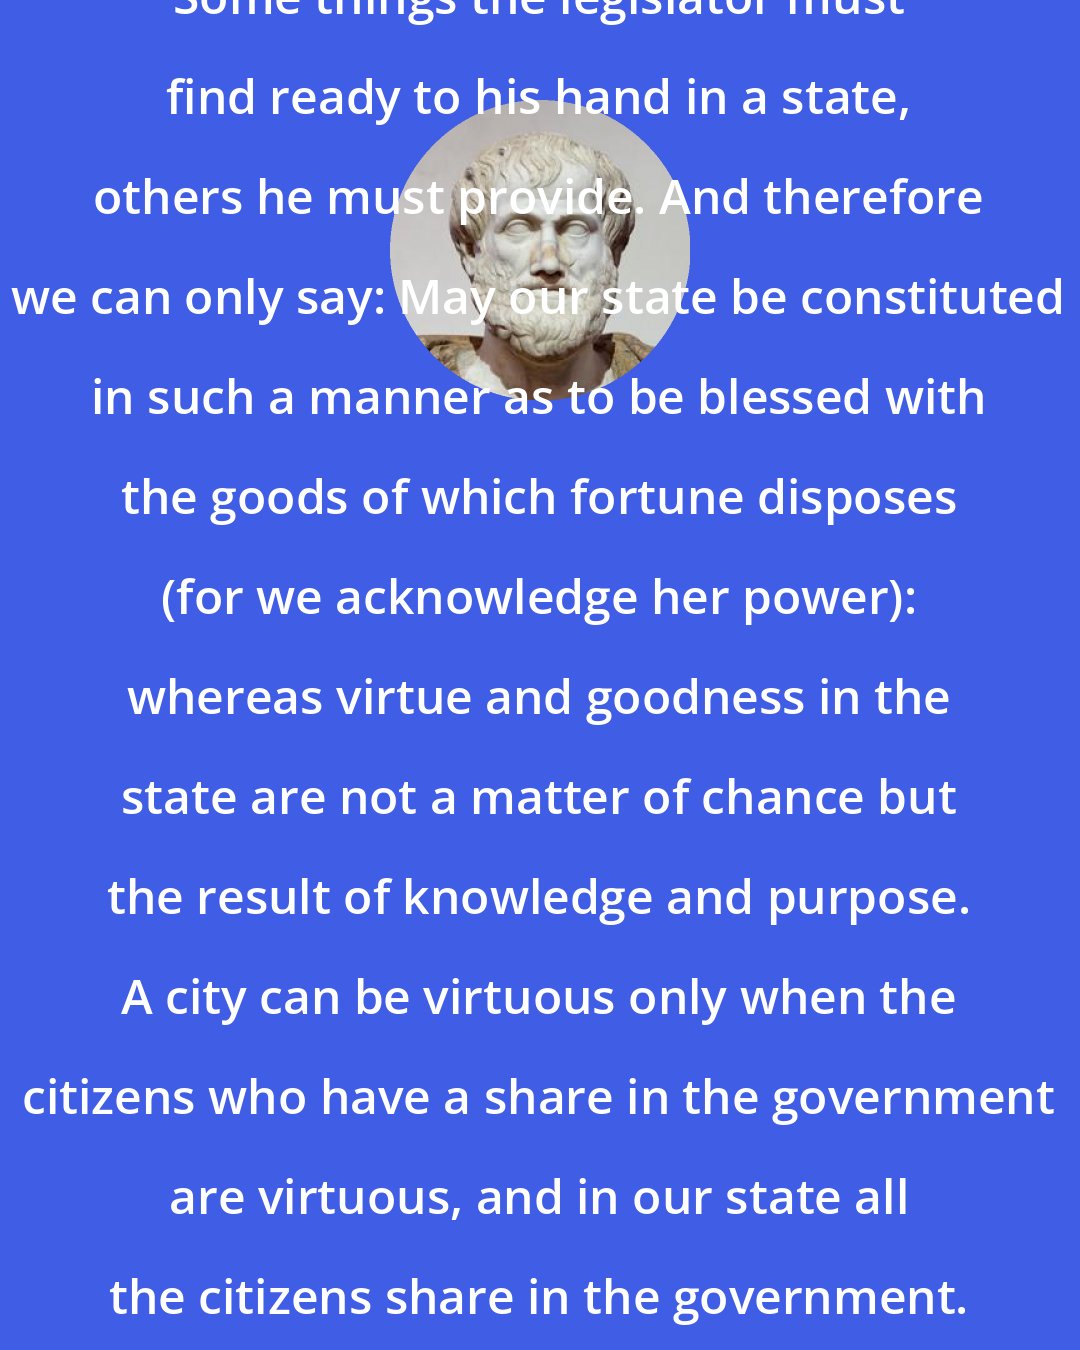 Aristotle: Some things the legislator must find ready to his hand in a state, others he must provide. And therefore we can only say: May our state be constituted in such a manner as to be blessed with the goods of which fortune disposes (for we acknowledge her power): whereas virtue and goodness in the state are not a matter of chance but the result of knowledge and purpose. A city can be virtuous only when the citizens who have a share in the government are virtuous, and in our state all the citizens share in the government.